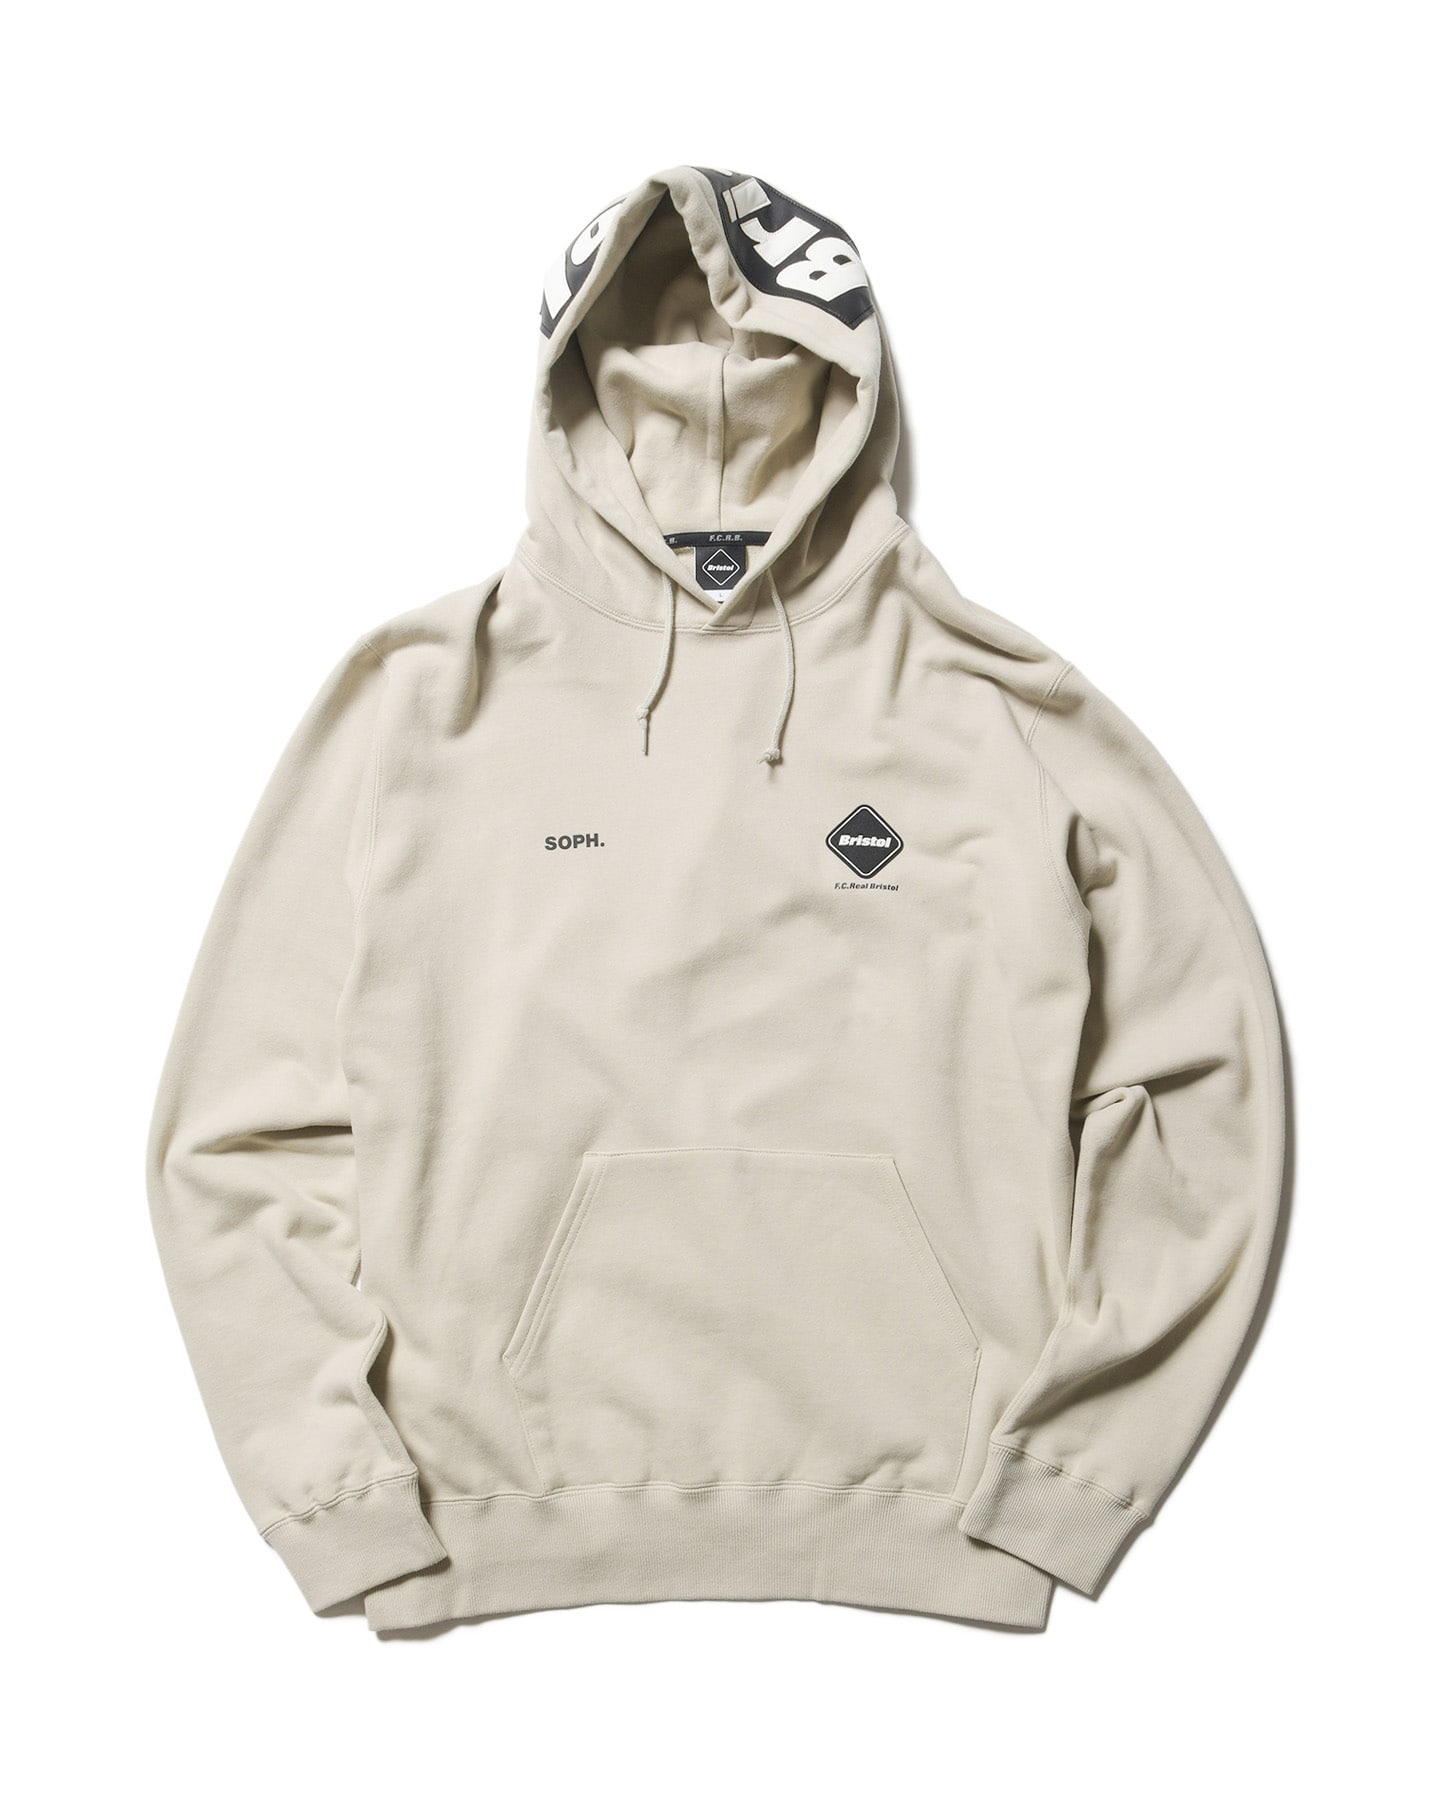 SOPH. | SYNTHETIC LEATHER APPLIQUE TEAM SWEAT HOODIE(M BEIGE):